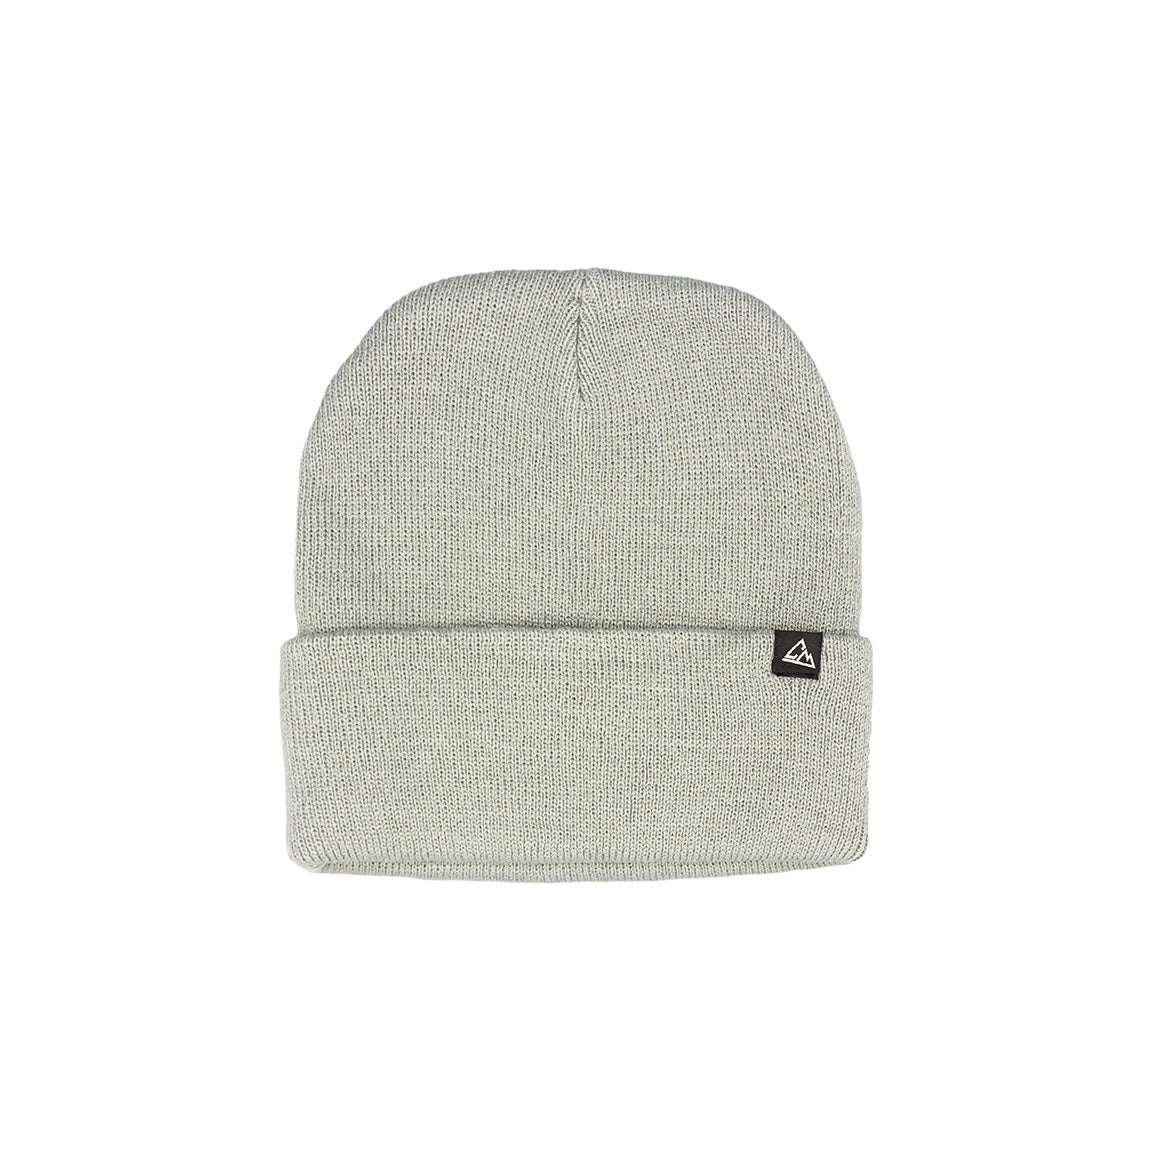 This is a gray foldable beanie with a ribbed design, featuring a small triangular logo on the front of the fold.